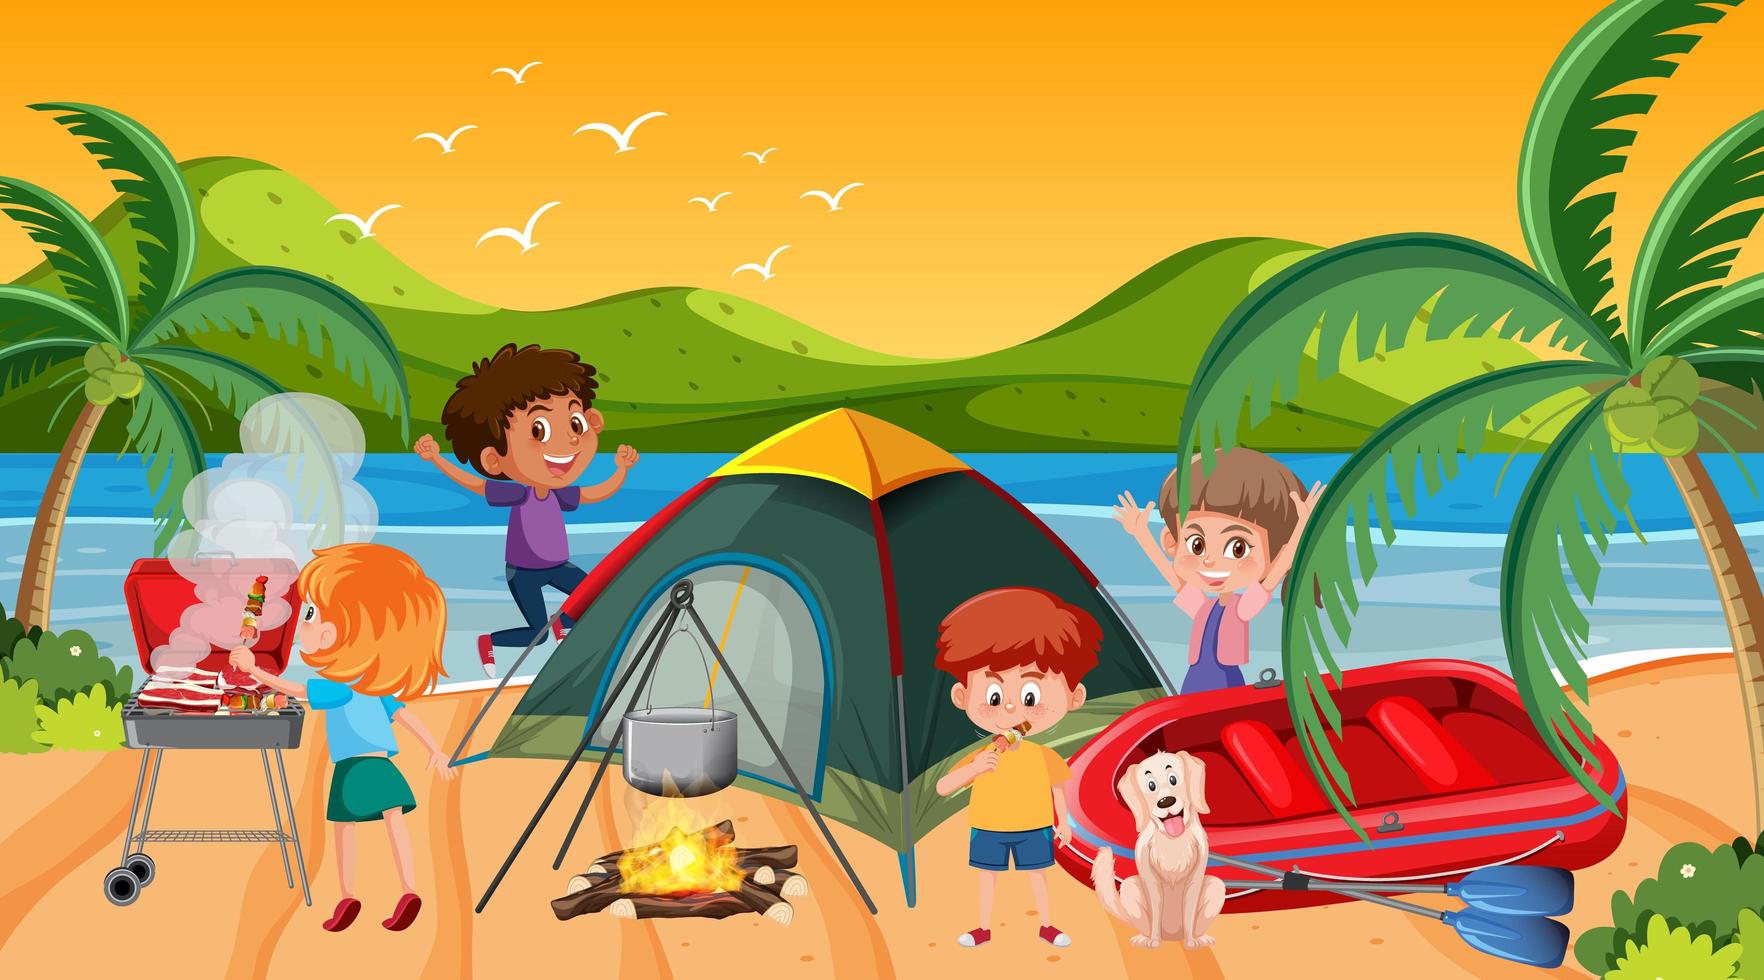 Picnic scene with happy family at the beach vector